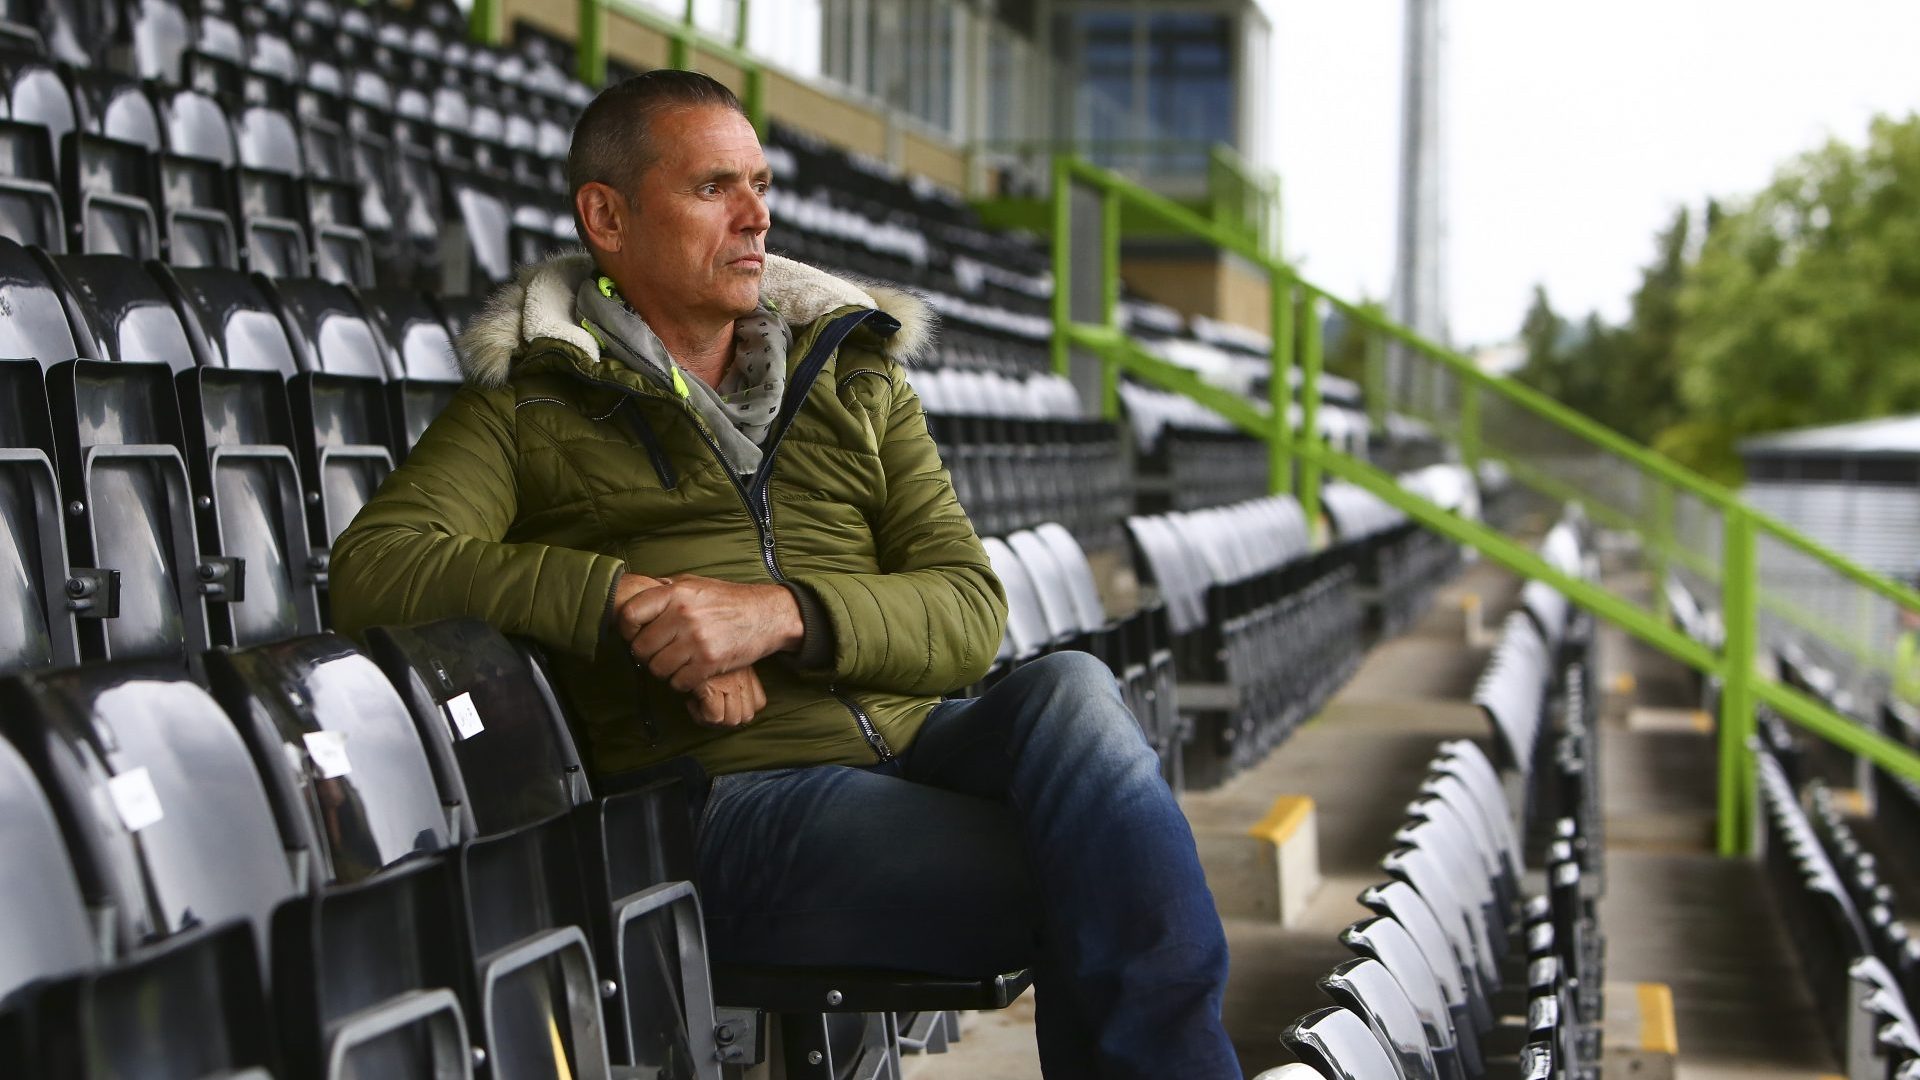 Ecotricity founder Dale Vince at his football club, Forest Green Rovers (Photo: GEOFF CADDICK/AFP via Getty Images)